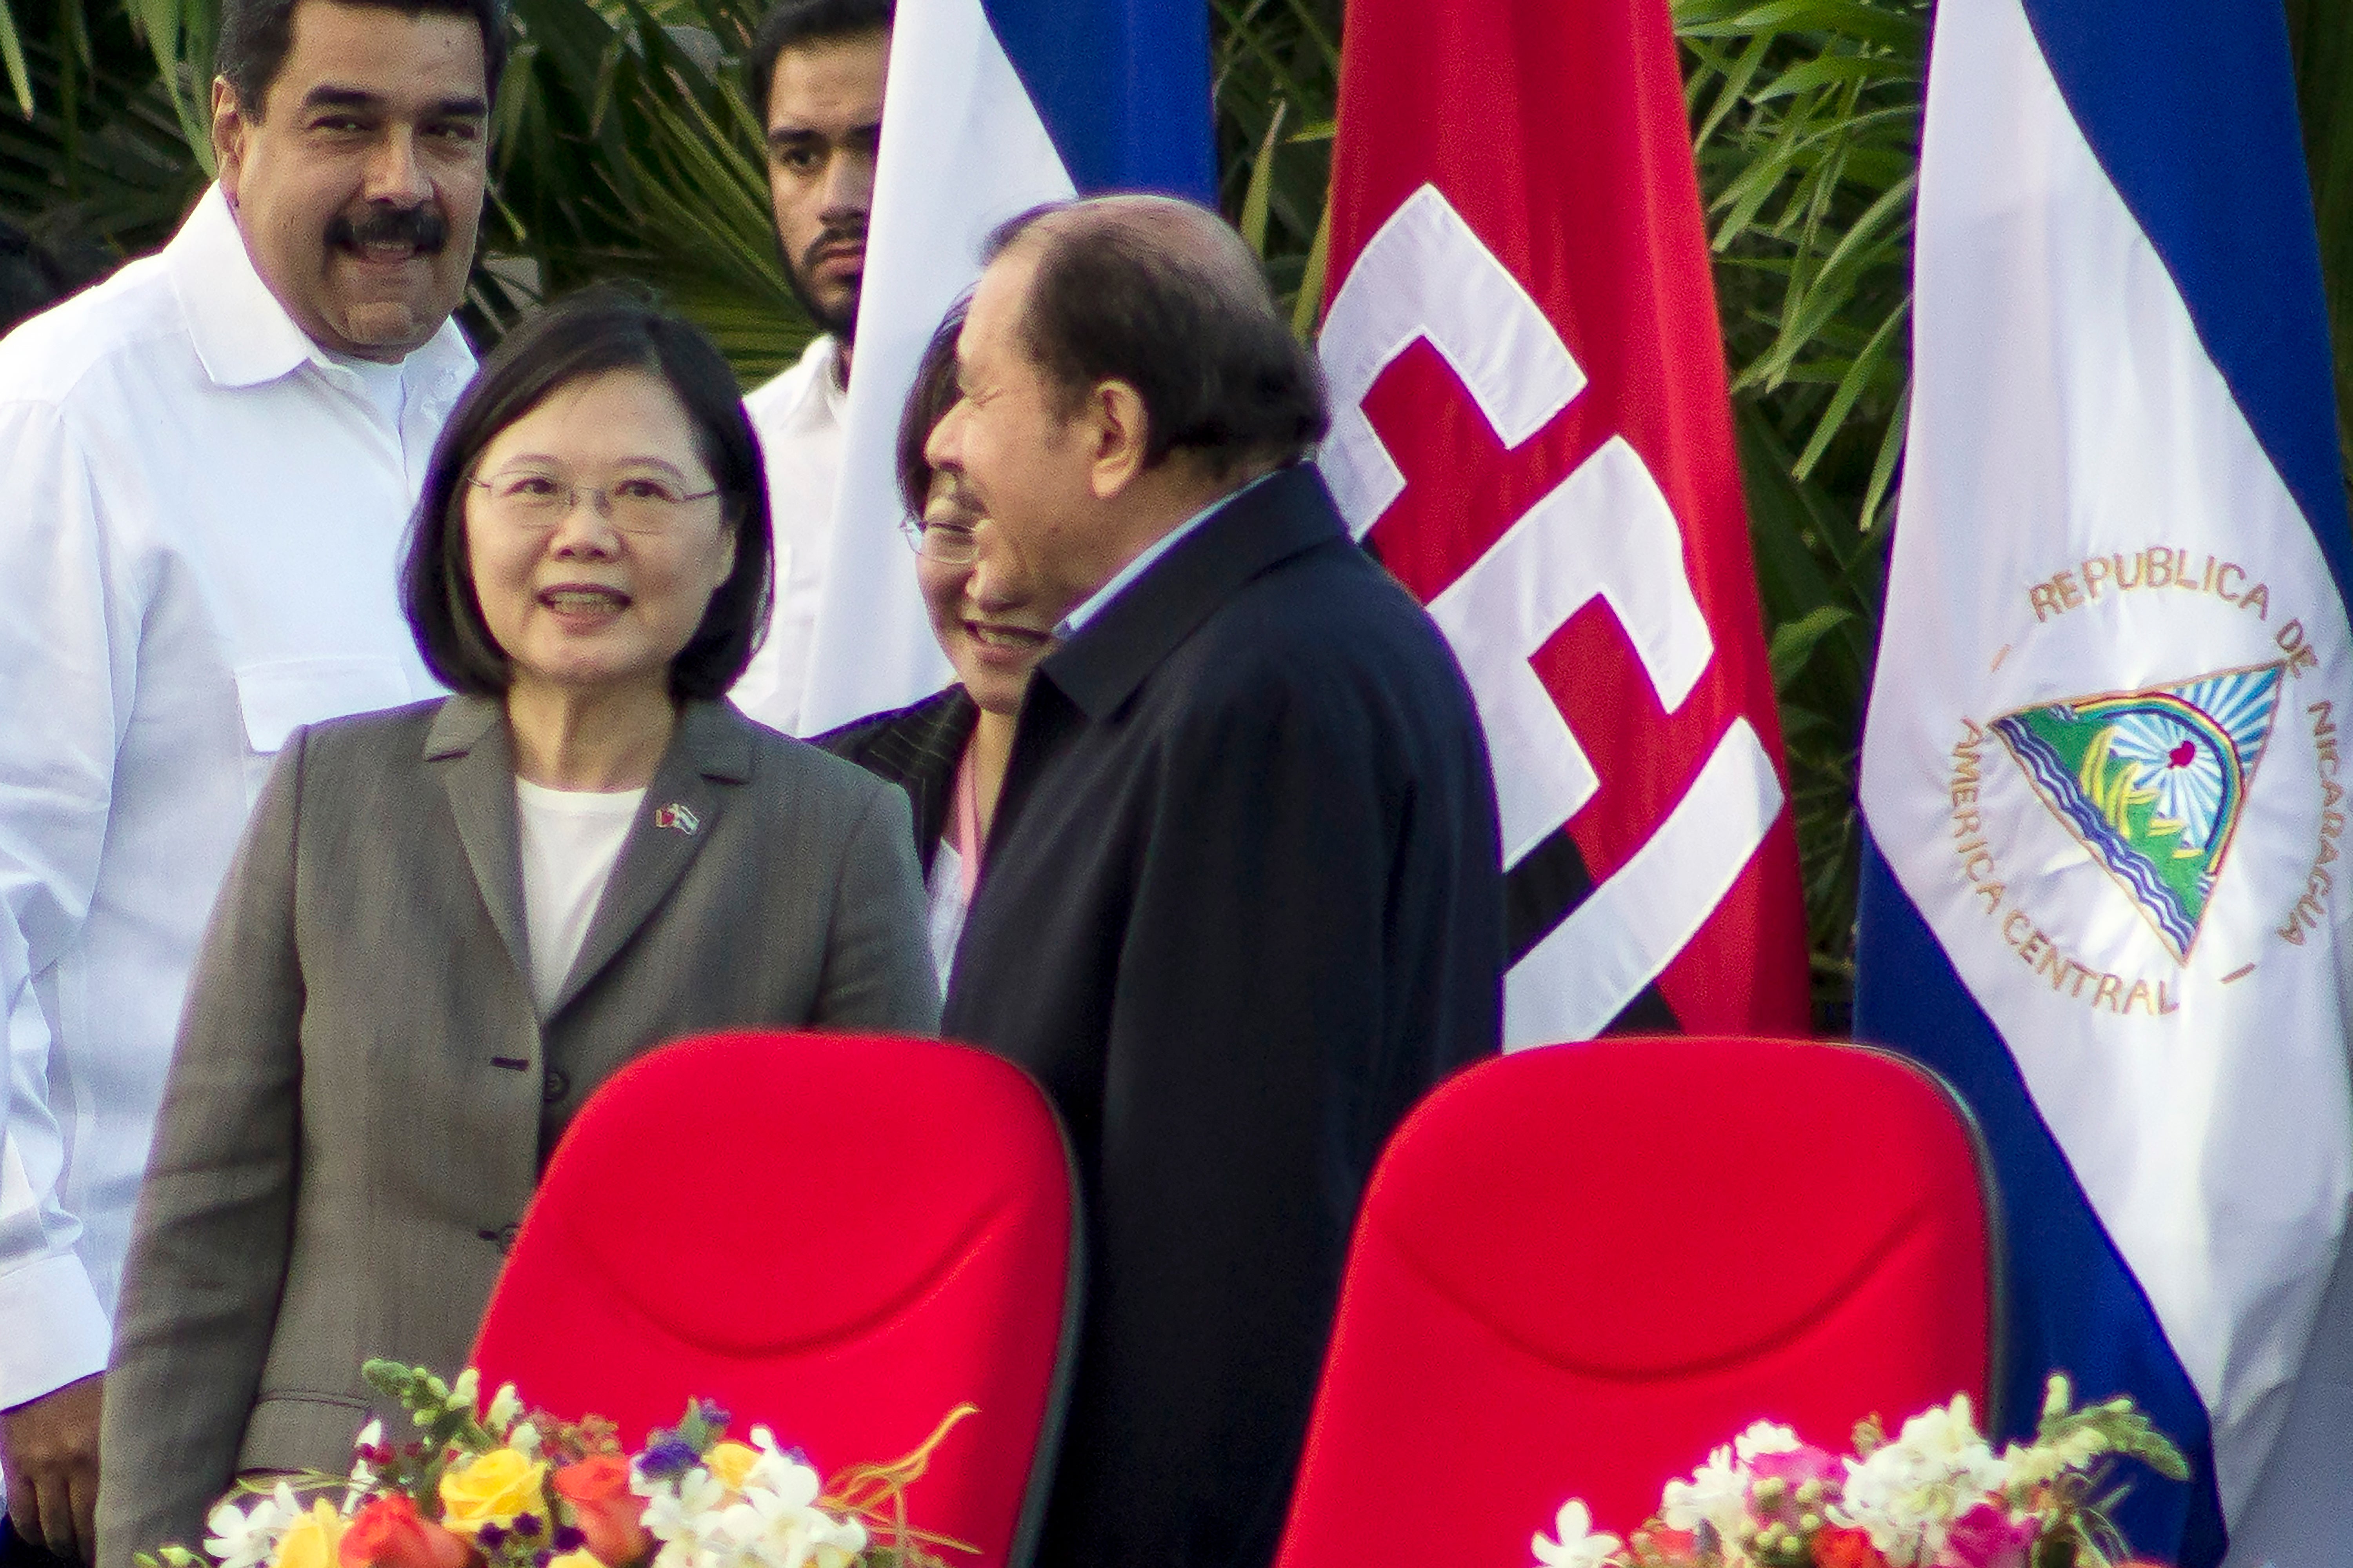 Nicaragua’s president Daniel Ortega welcomes Taiwan’s President Tsai Ing-wen at the start of his swearing-in ceremony in Managua in 2017